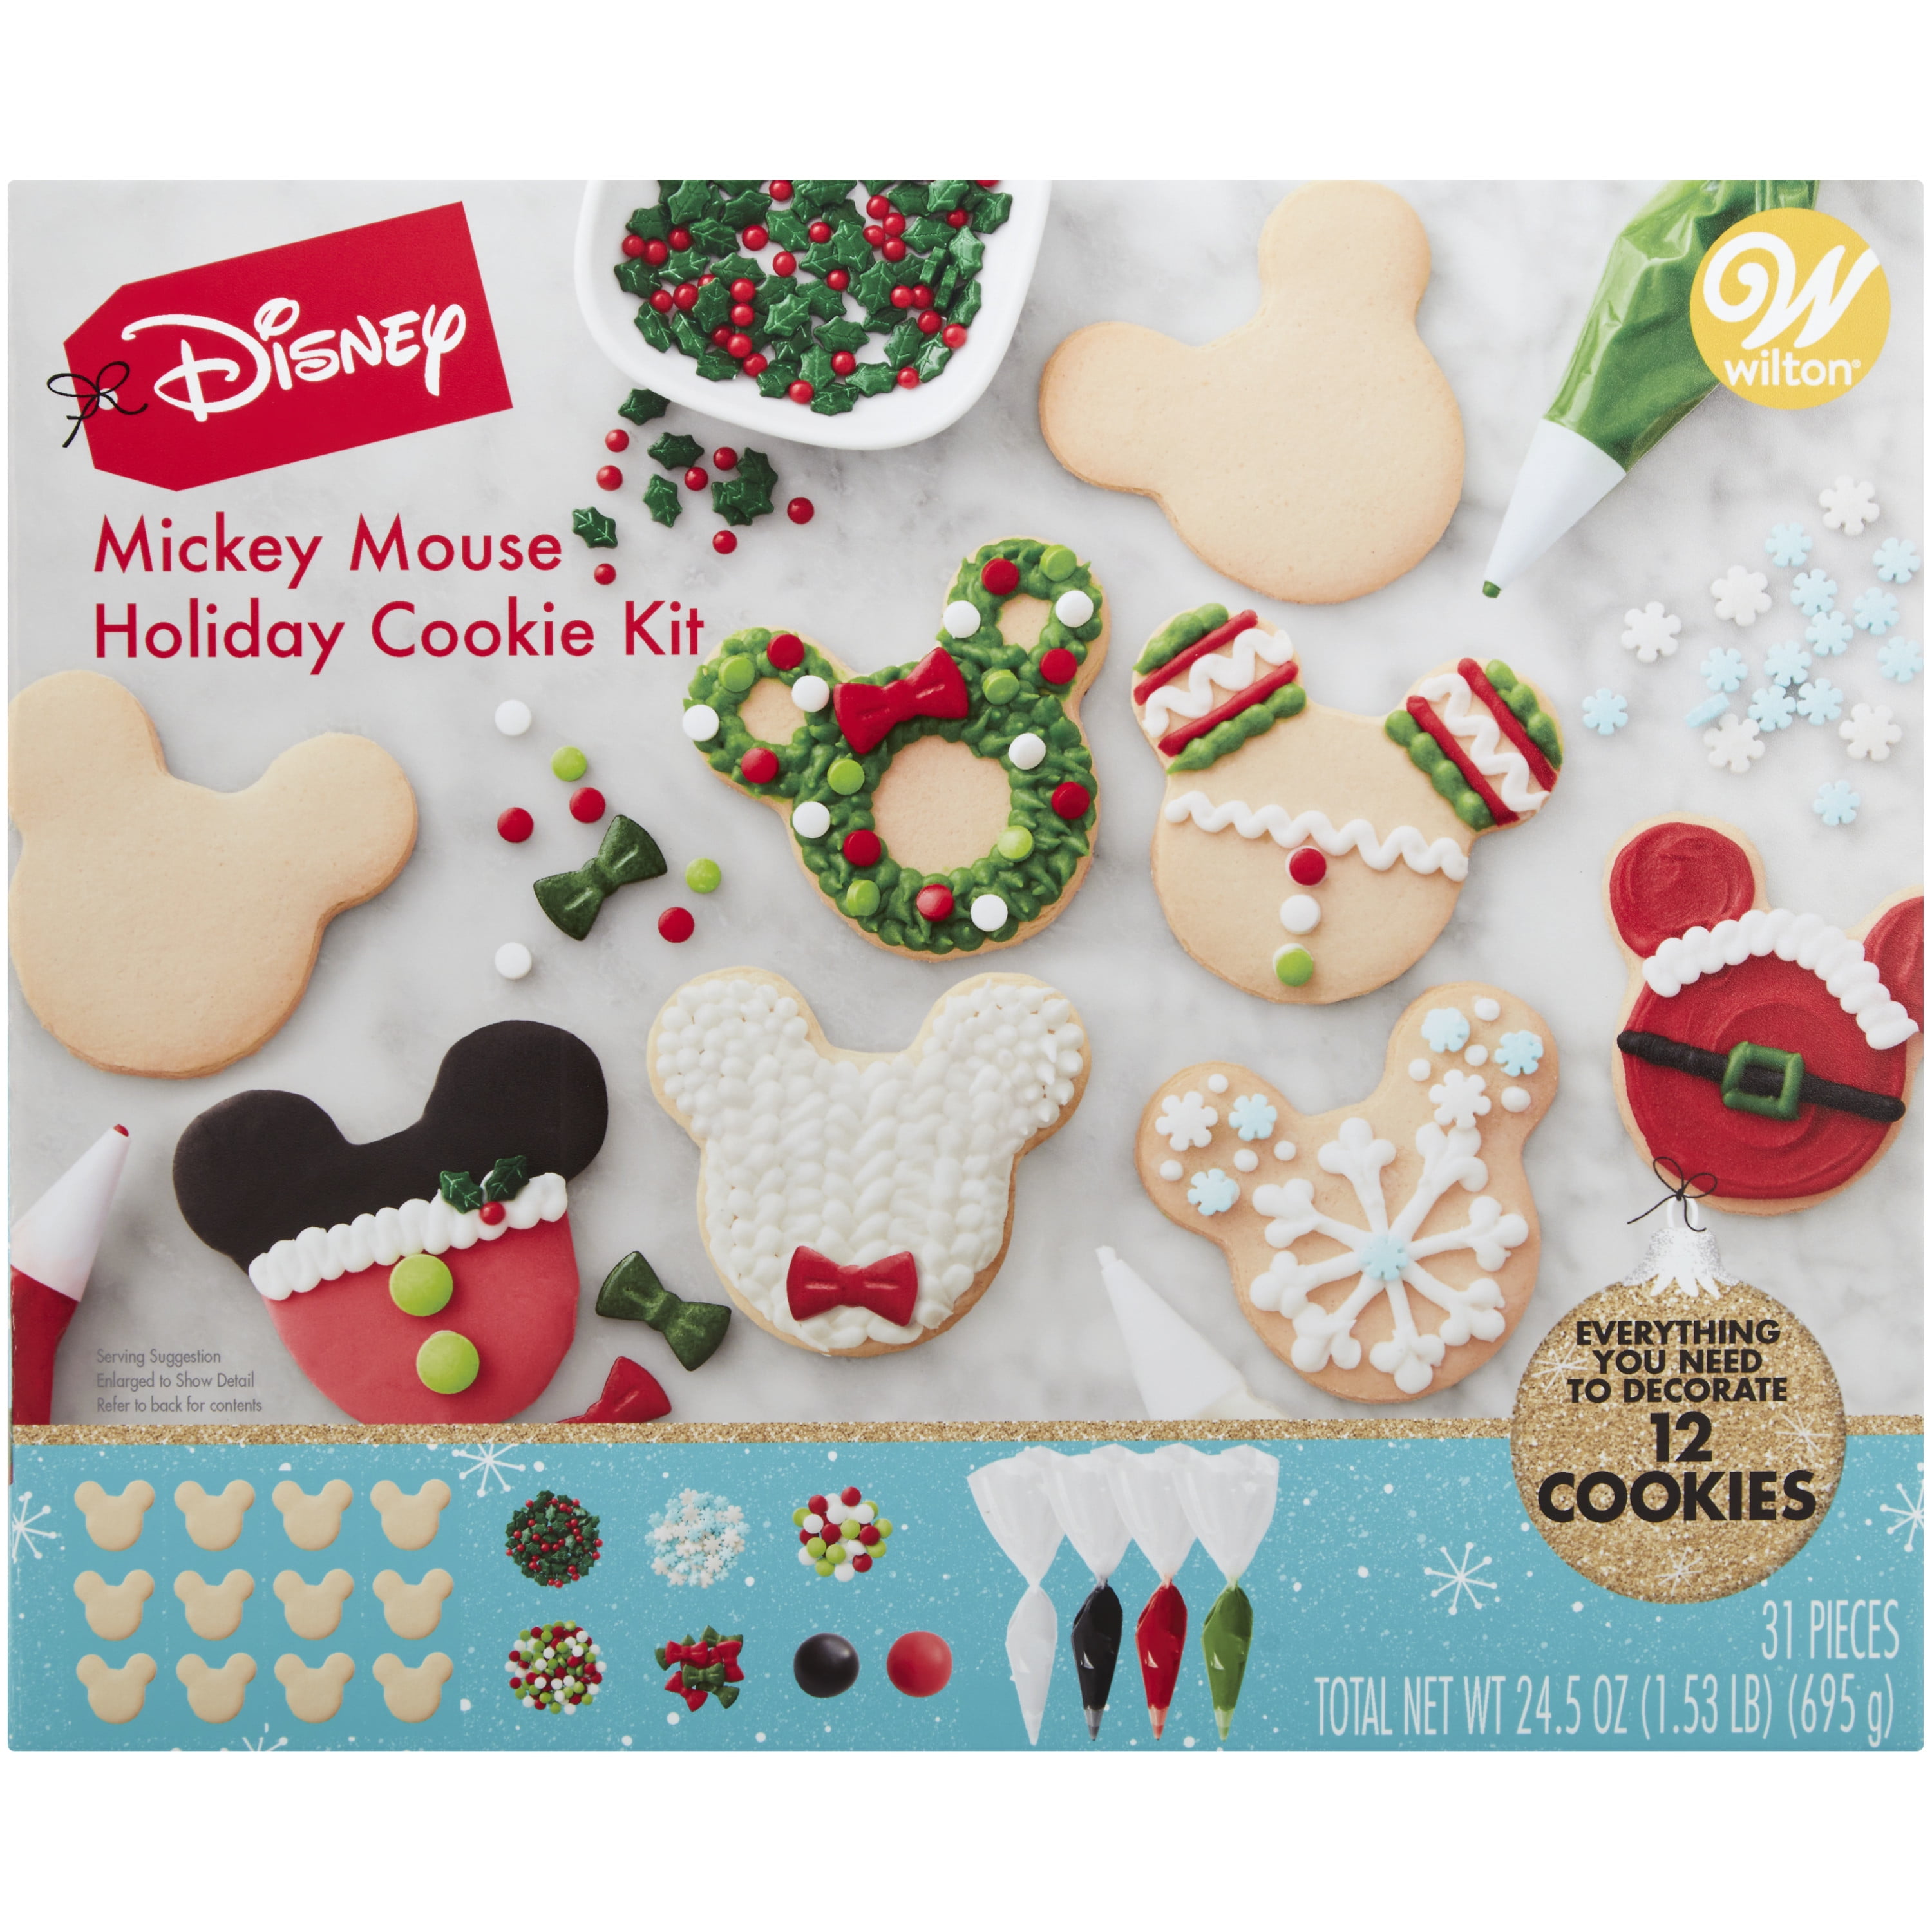 Wilton Pre-Baked Ready to Decorate Disney Mickey Mouse Holiday Cookie Kit, 31-Piece